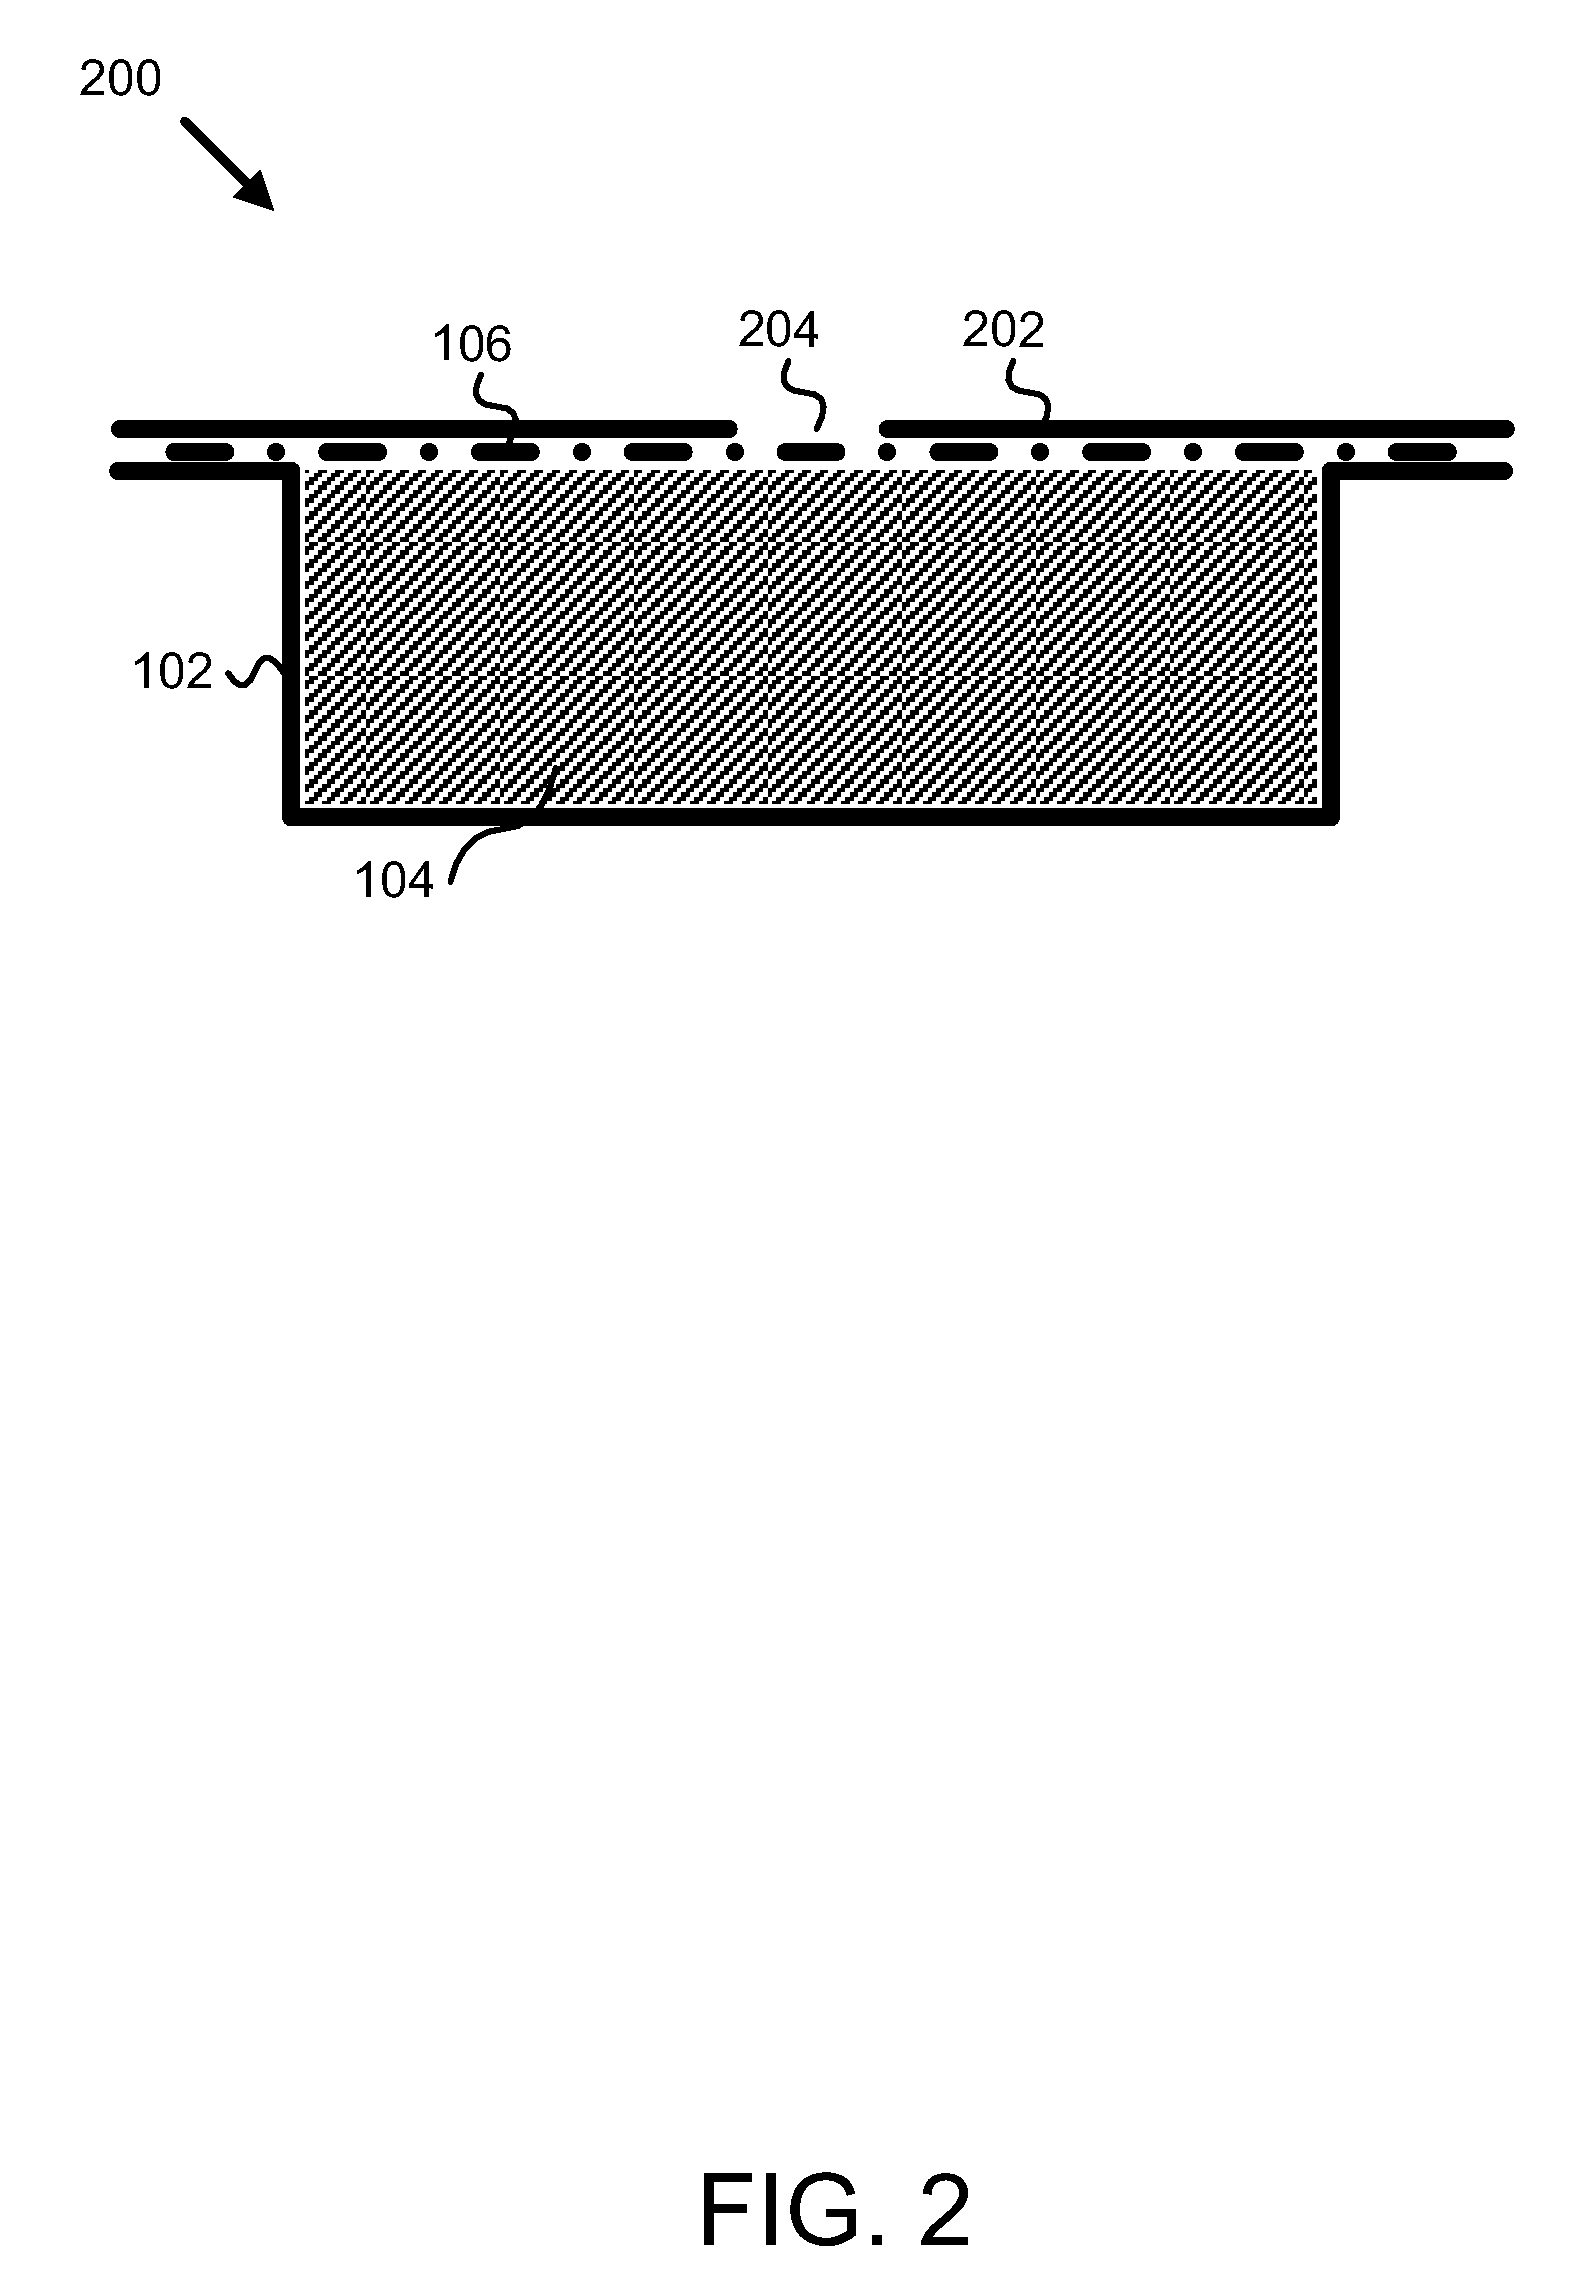 Apparatus, system, and method for controlling out-gassing and humidity in a closed space-constrained environment